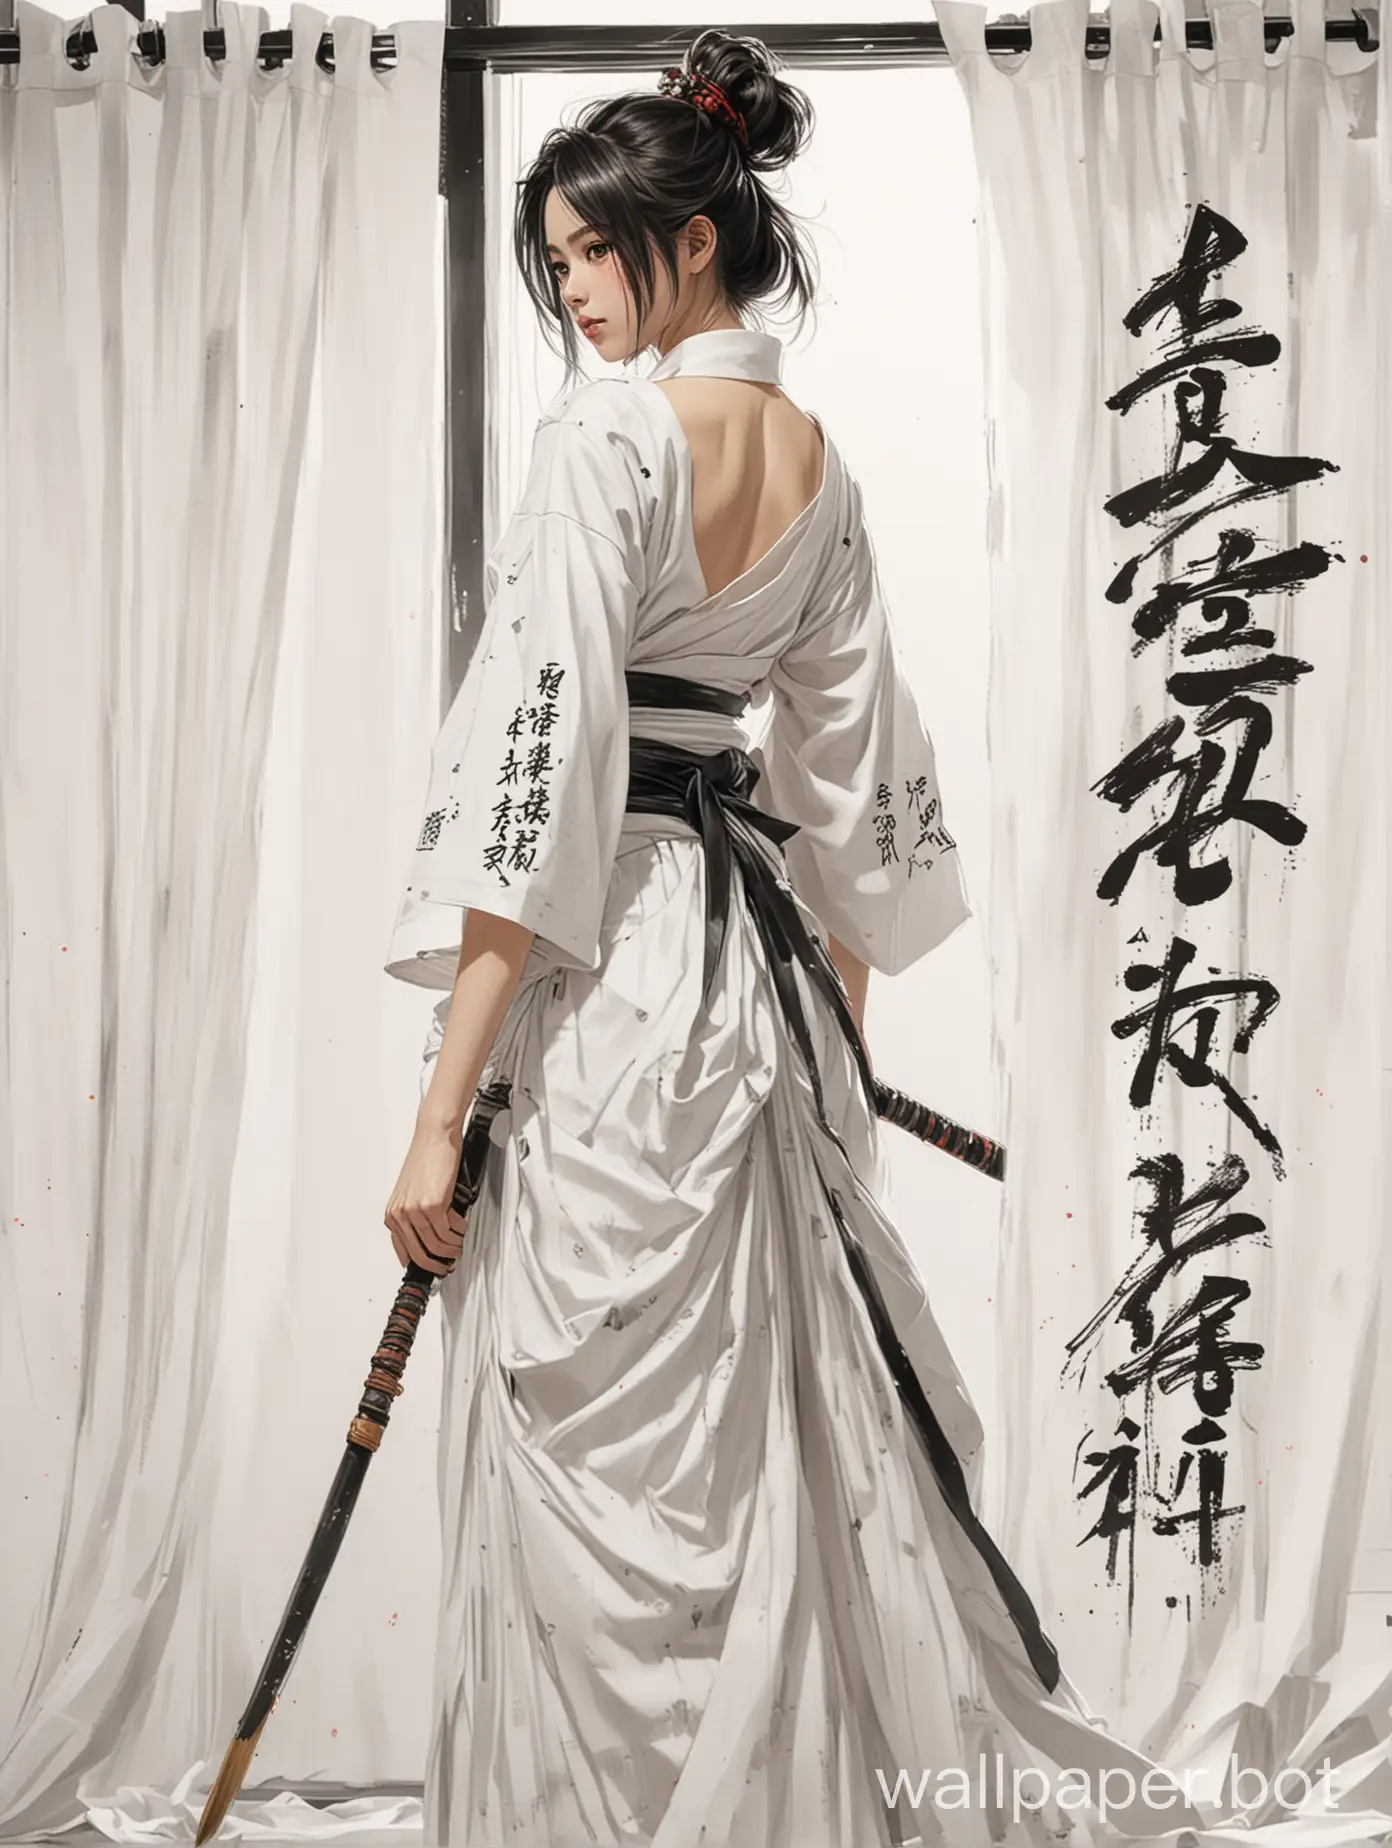 cool japan girl, white dress, white background,Turn your body to the left, anime In the story,samurai,Sketching styles, japan words in front,Japanese-style white curtains,a few black strokes with a brush behind the body